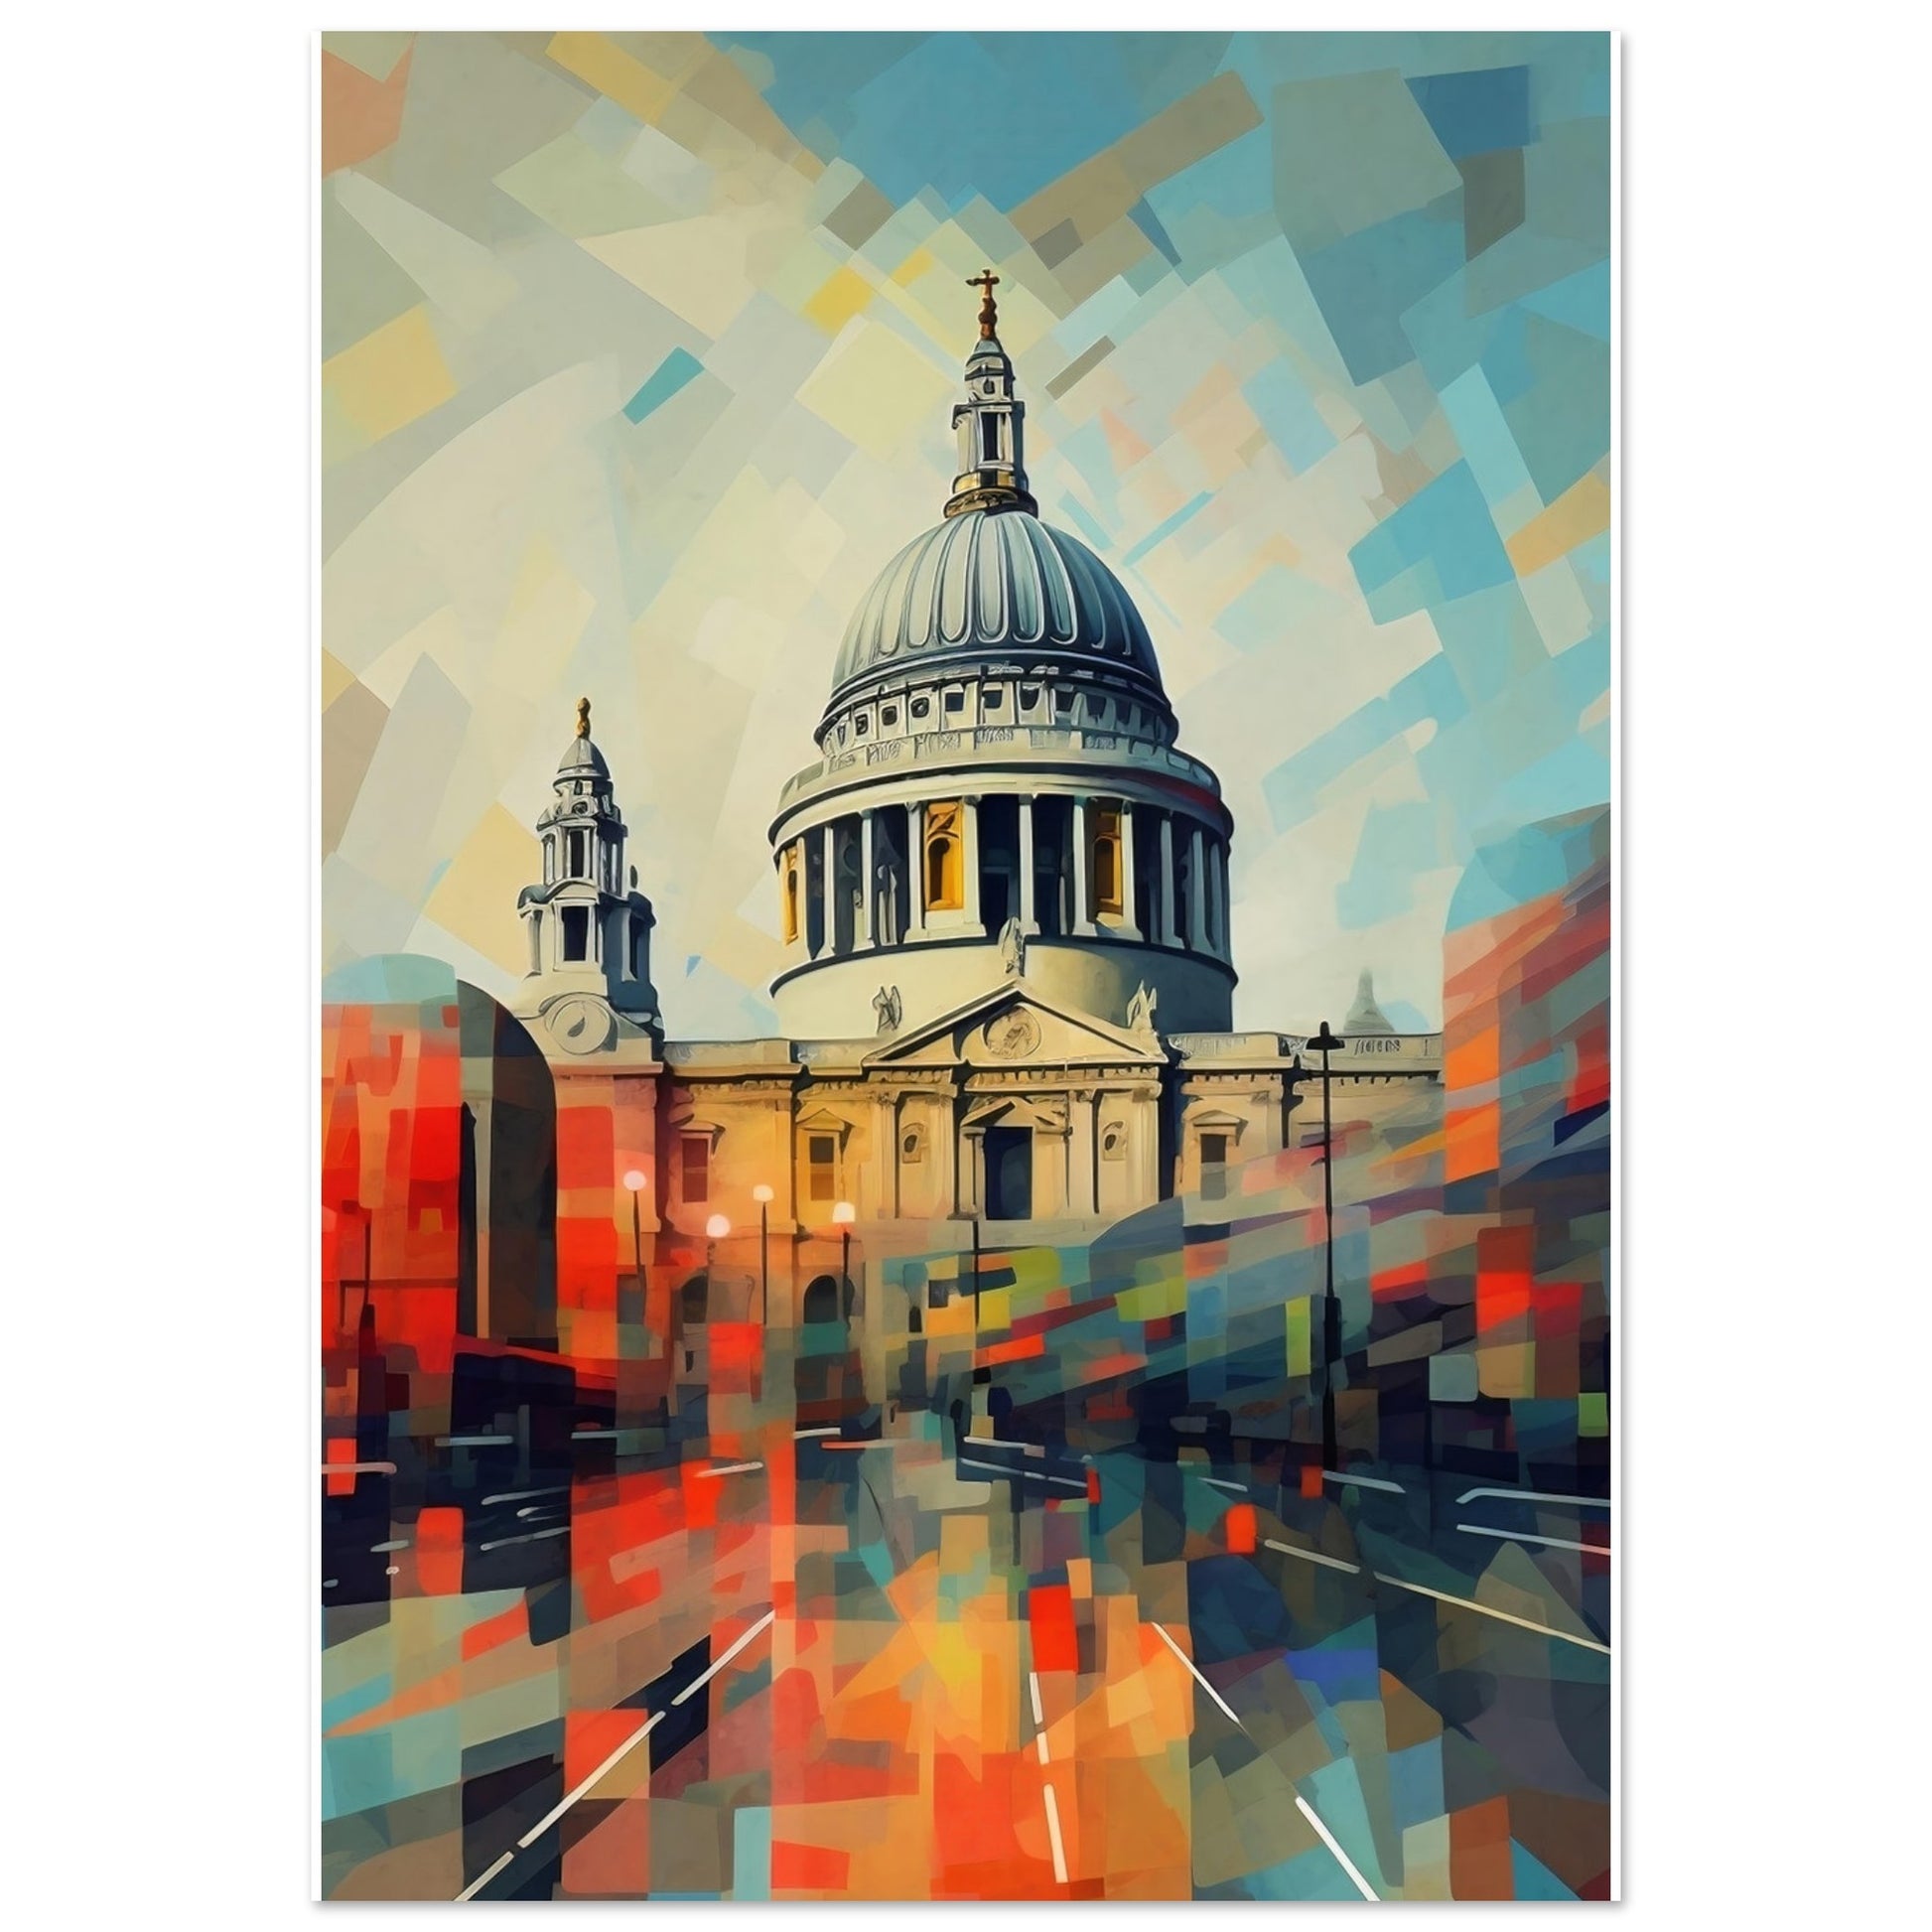 St Paul's CathedralAbstract Art - Print Room Ltd No Frame Selected 70x100 cm / 28x40"